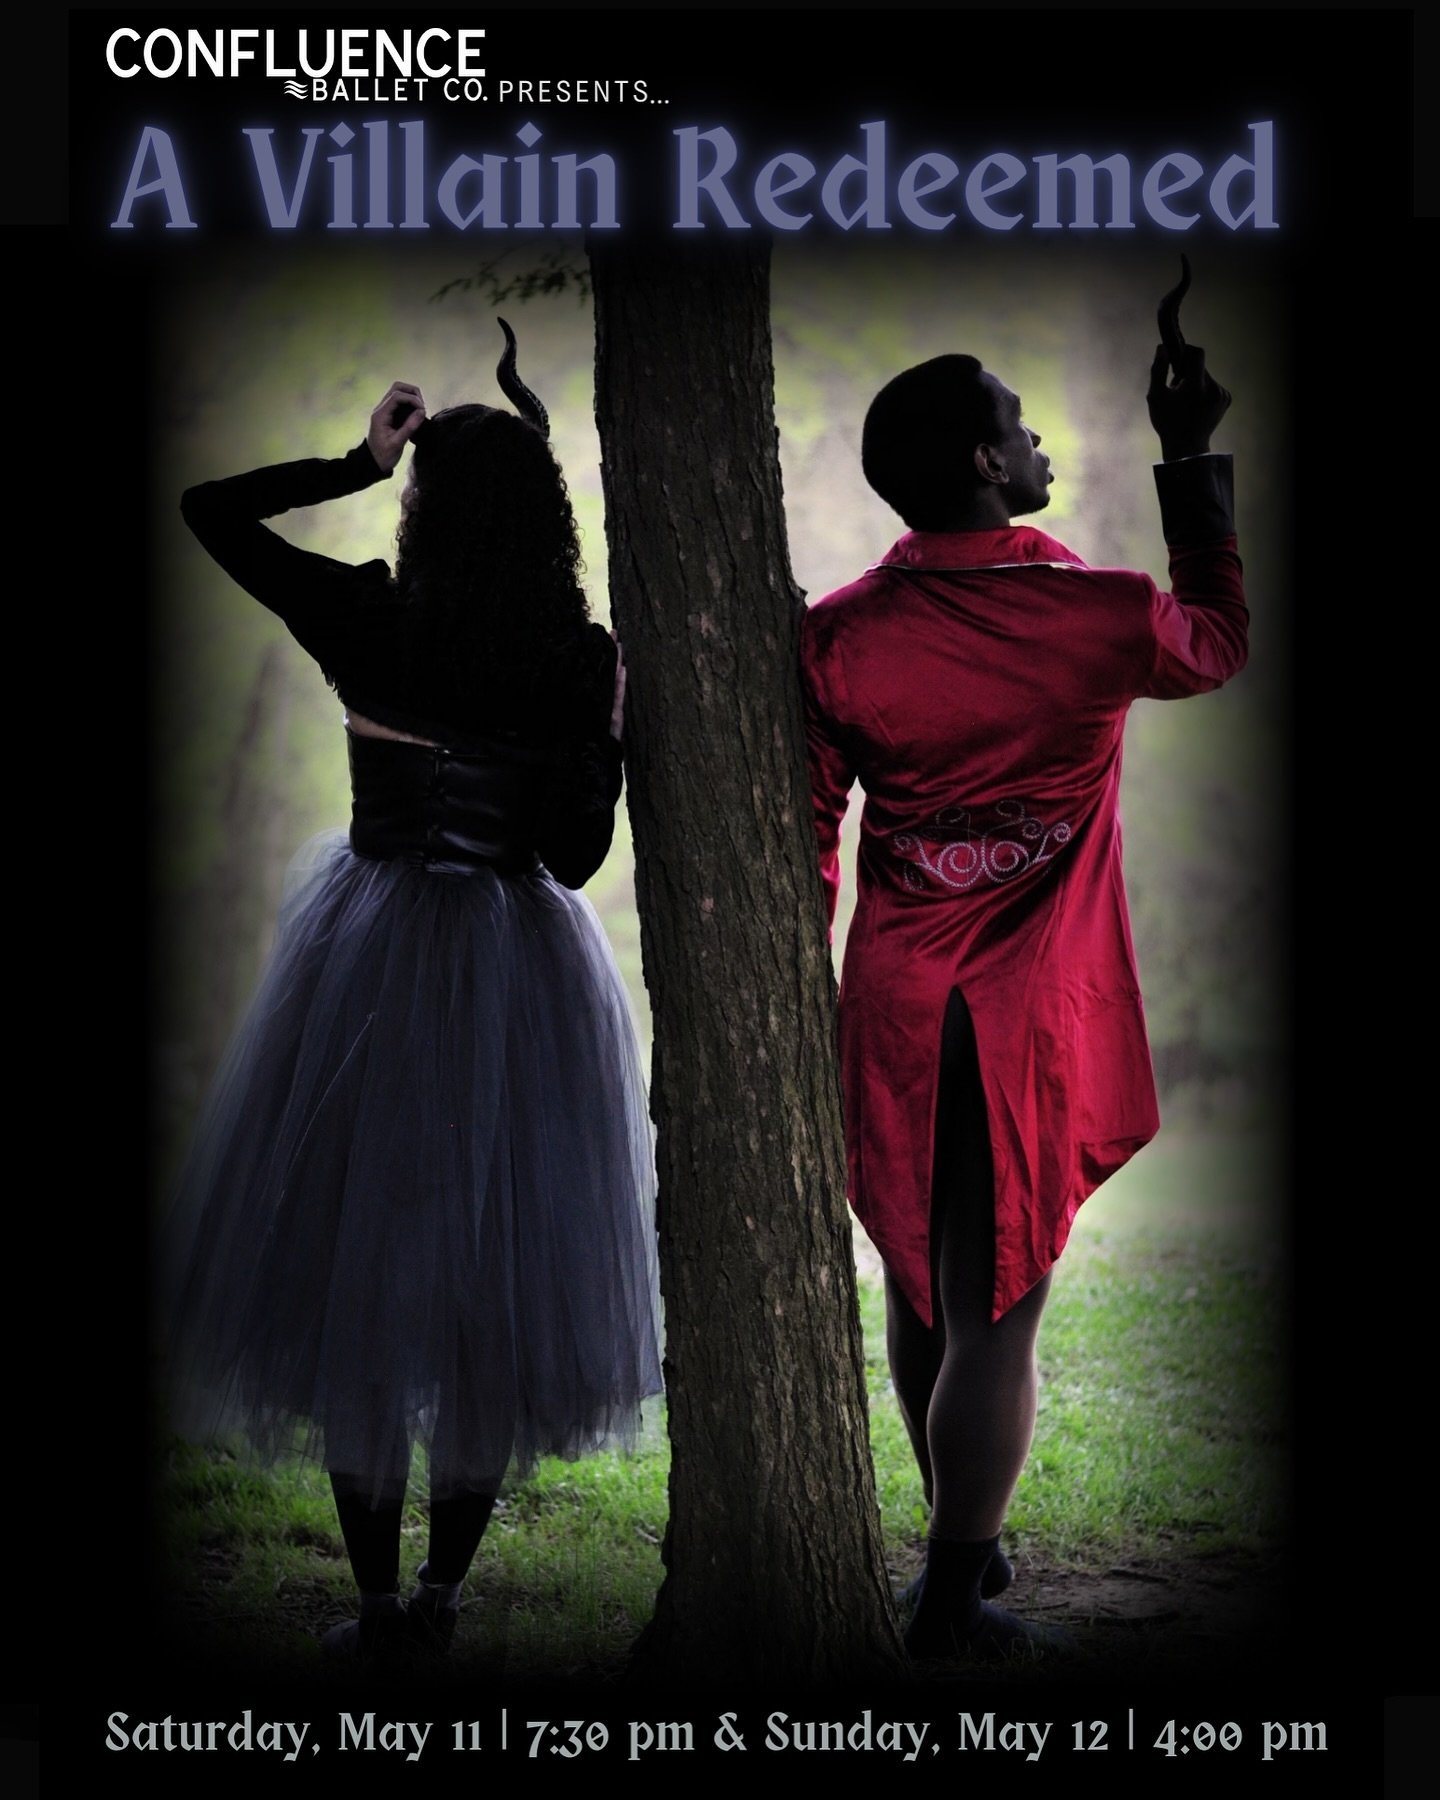 ✨TOMORROW IS THE DAY!✨ 

After tireless dedication and countless hours of hard work from our incredible dancers and team, we&rsquo;re thrilled to finally present Confluence Ballet Co.&rsquo;s original story ballet, &lsquo;A Villain Redeemed.&rsquo; ?